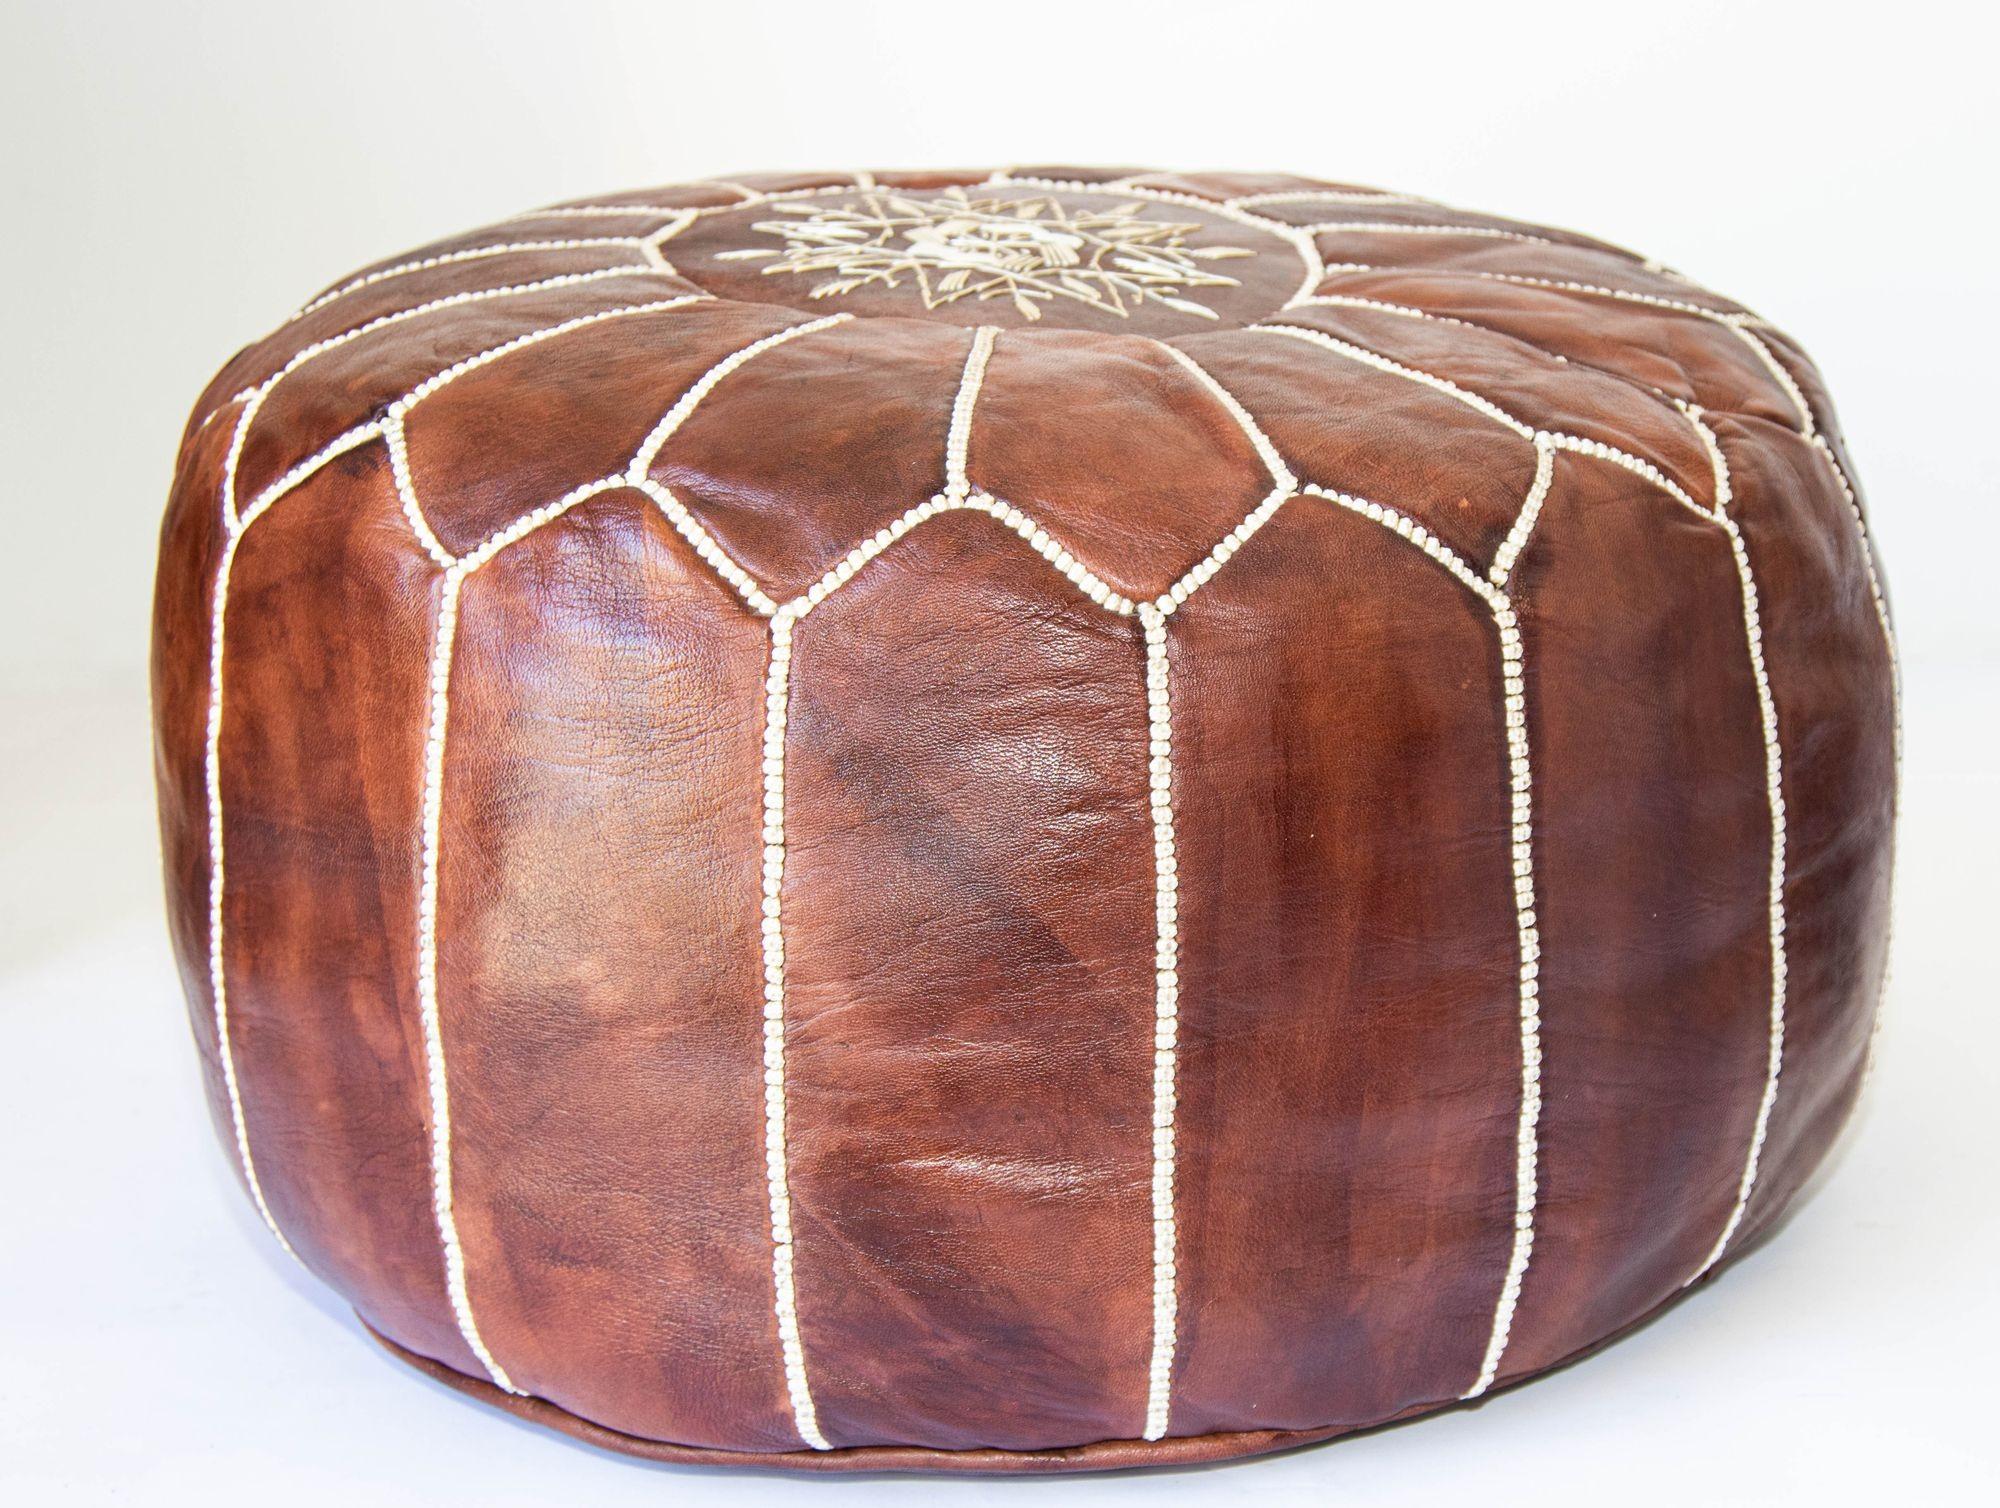 Moroccan handcrafted brown leather ottoman, with embroideries.
Could be used as a stool, side table or ottoman.
The Moroccan leather poufs are hand-tooled and embroidered with white thread.
Very nice handmade Moroccan dark brown color leather pouf